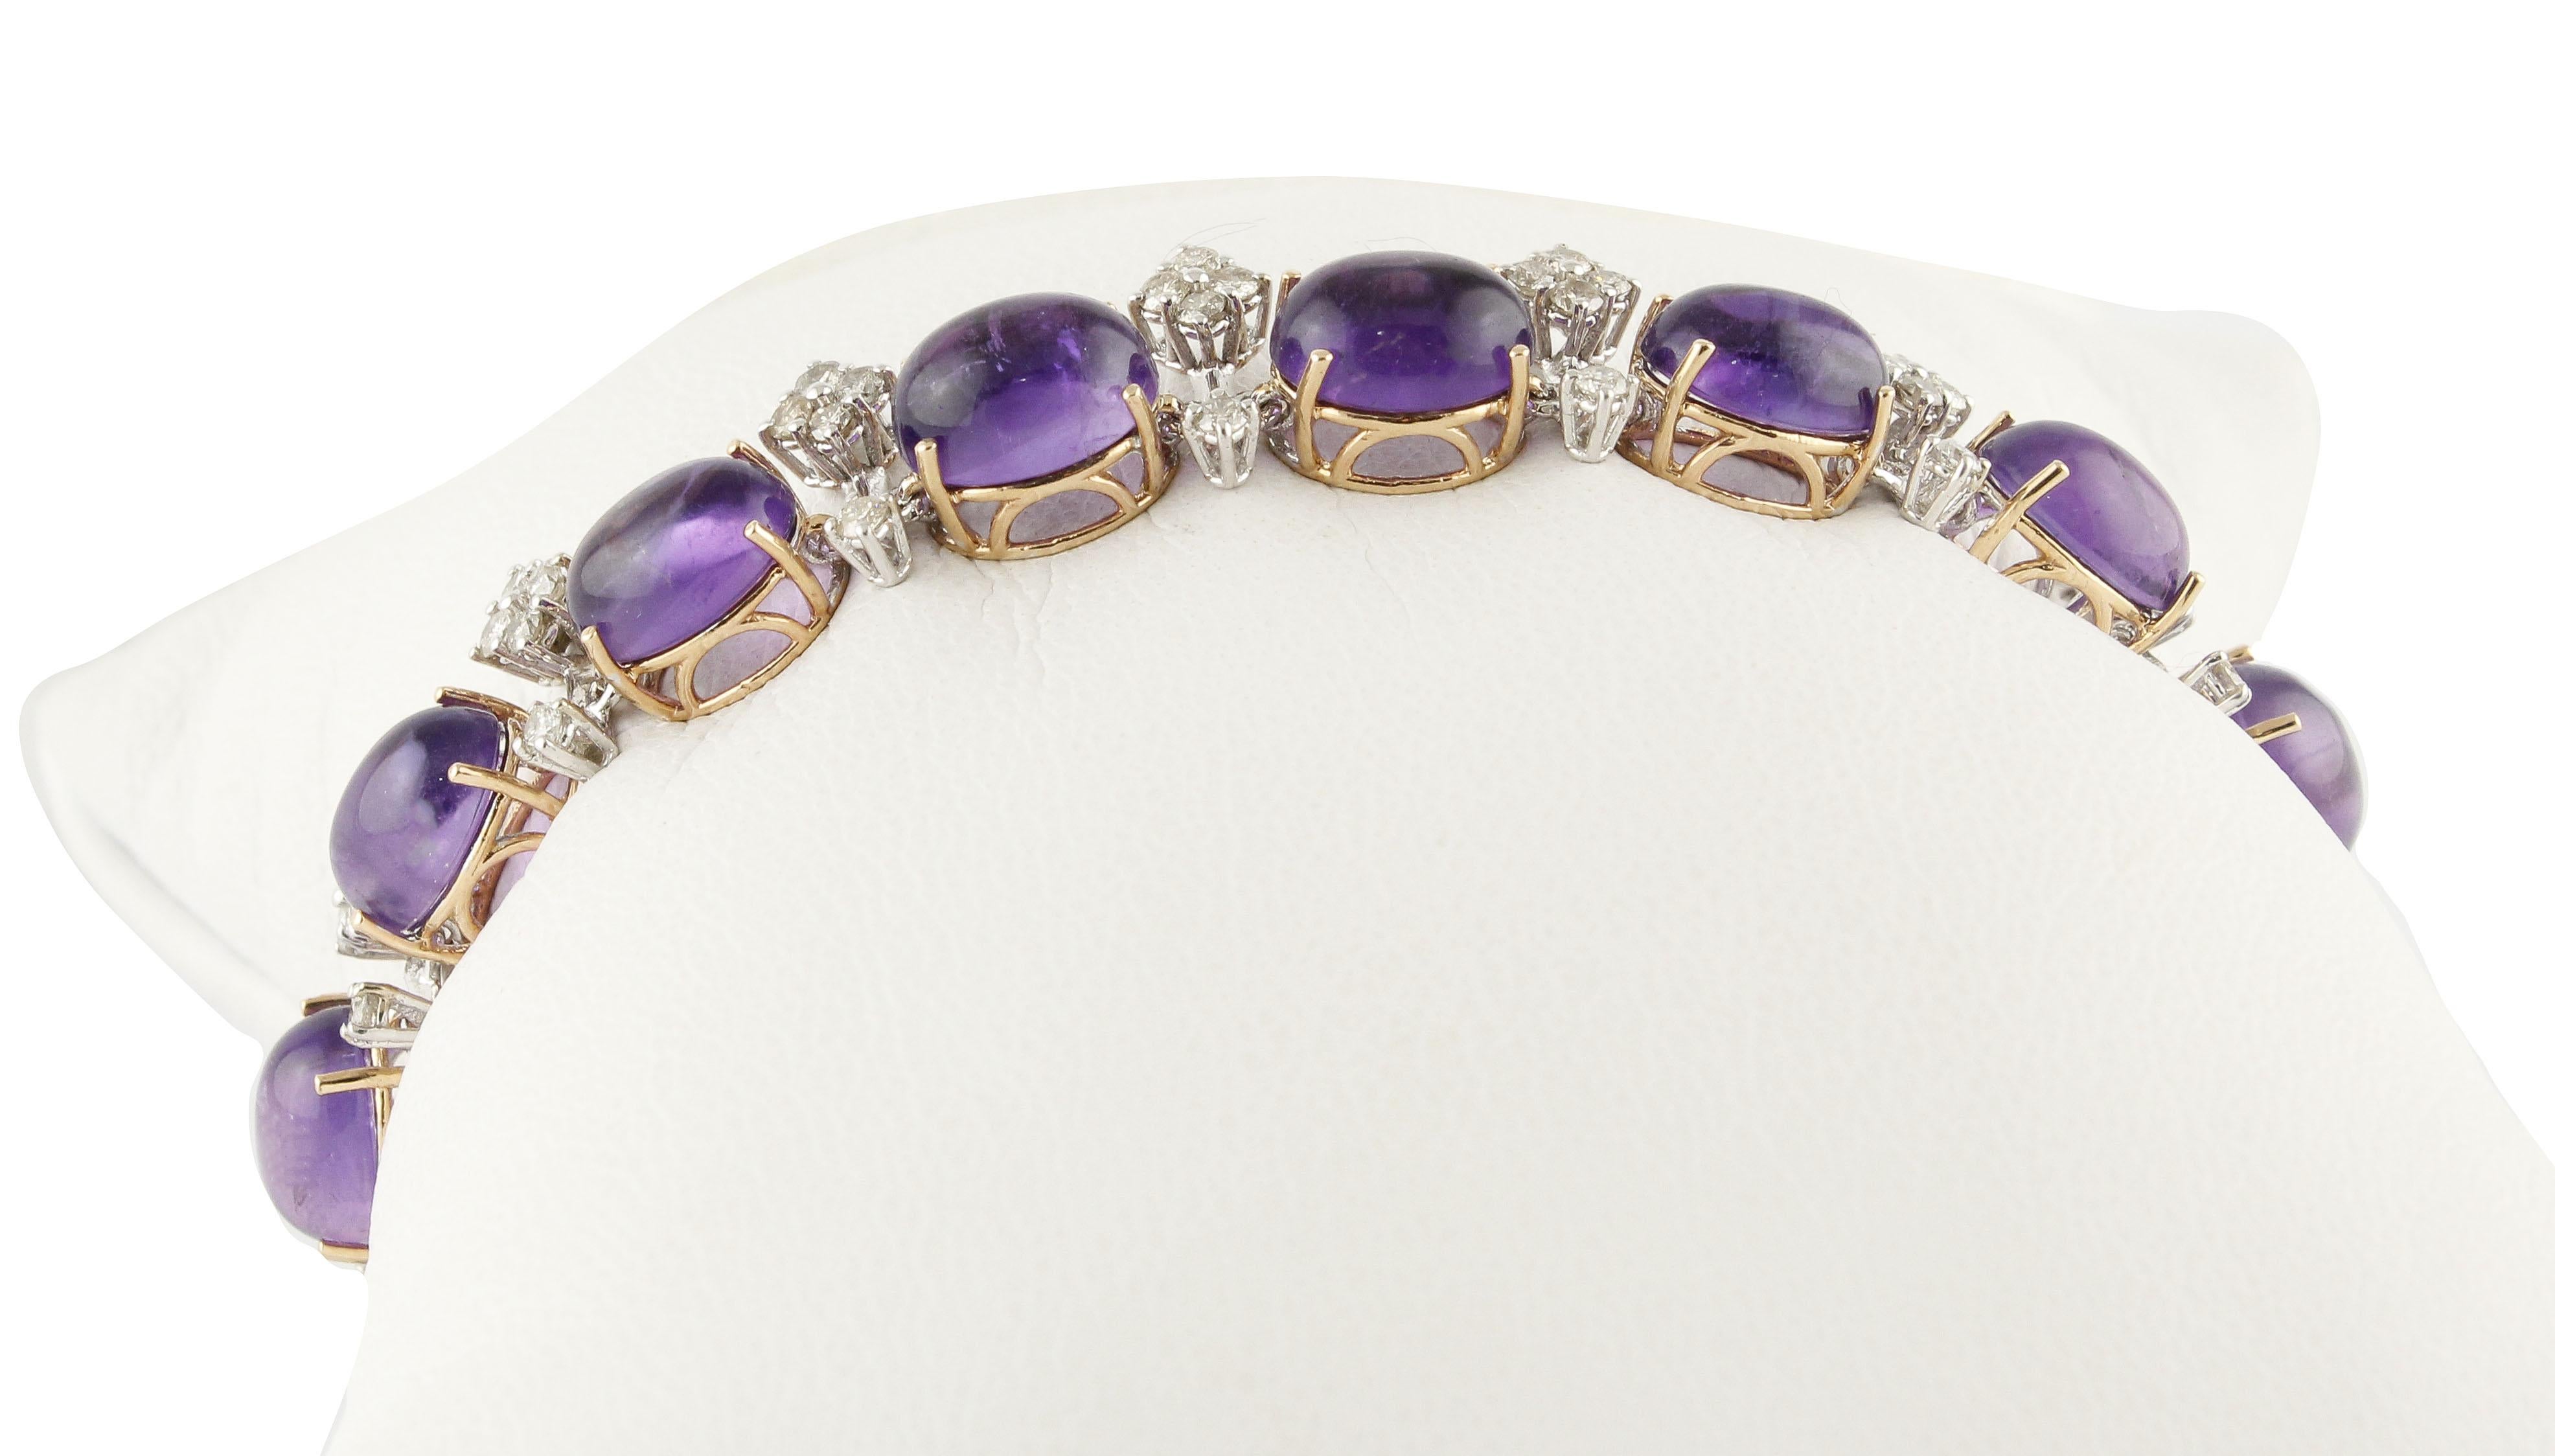 Elegant and refine link bracelet in 14K white and rose gold composed of small white diamonds detailes and a row of deep color cabochon cut amethysts 
Diamonds 2.45 ct 
Amethysts 29.61 ct 
Total Weight 17.10 g 
R.F + oogf
Length 18.50 cm 
Width 1 cm